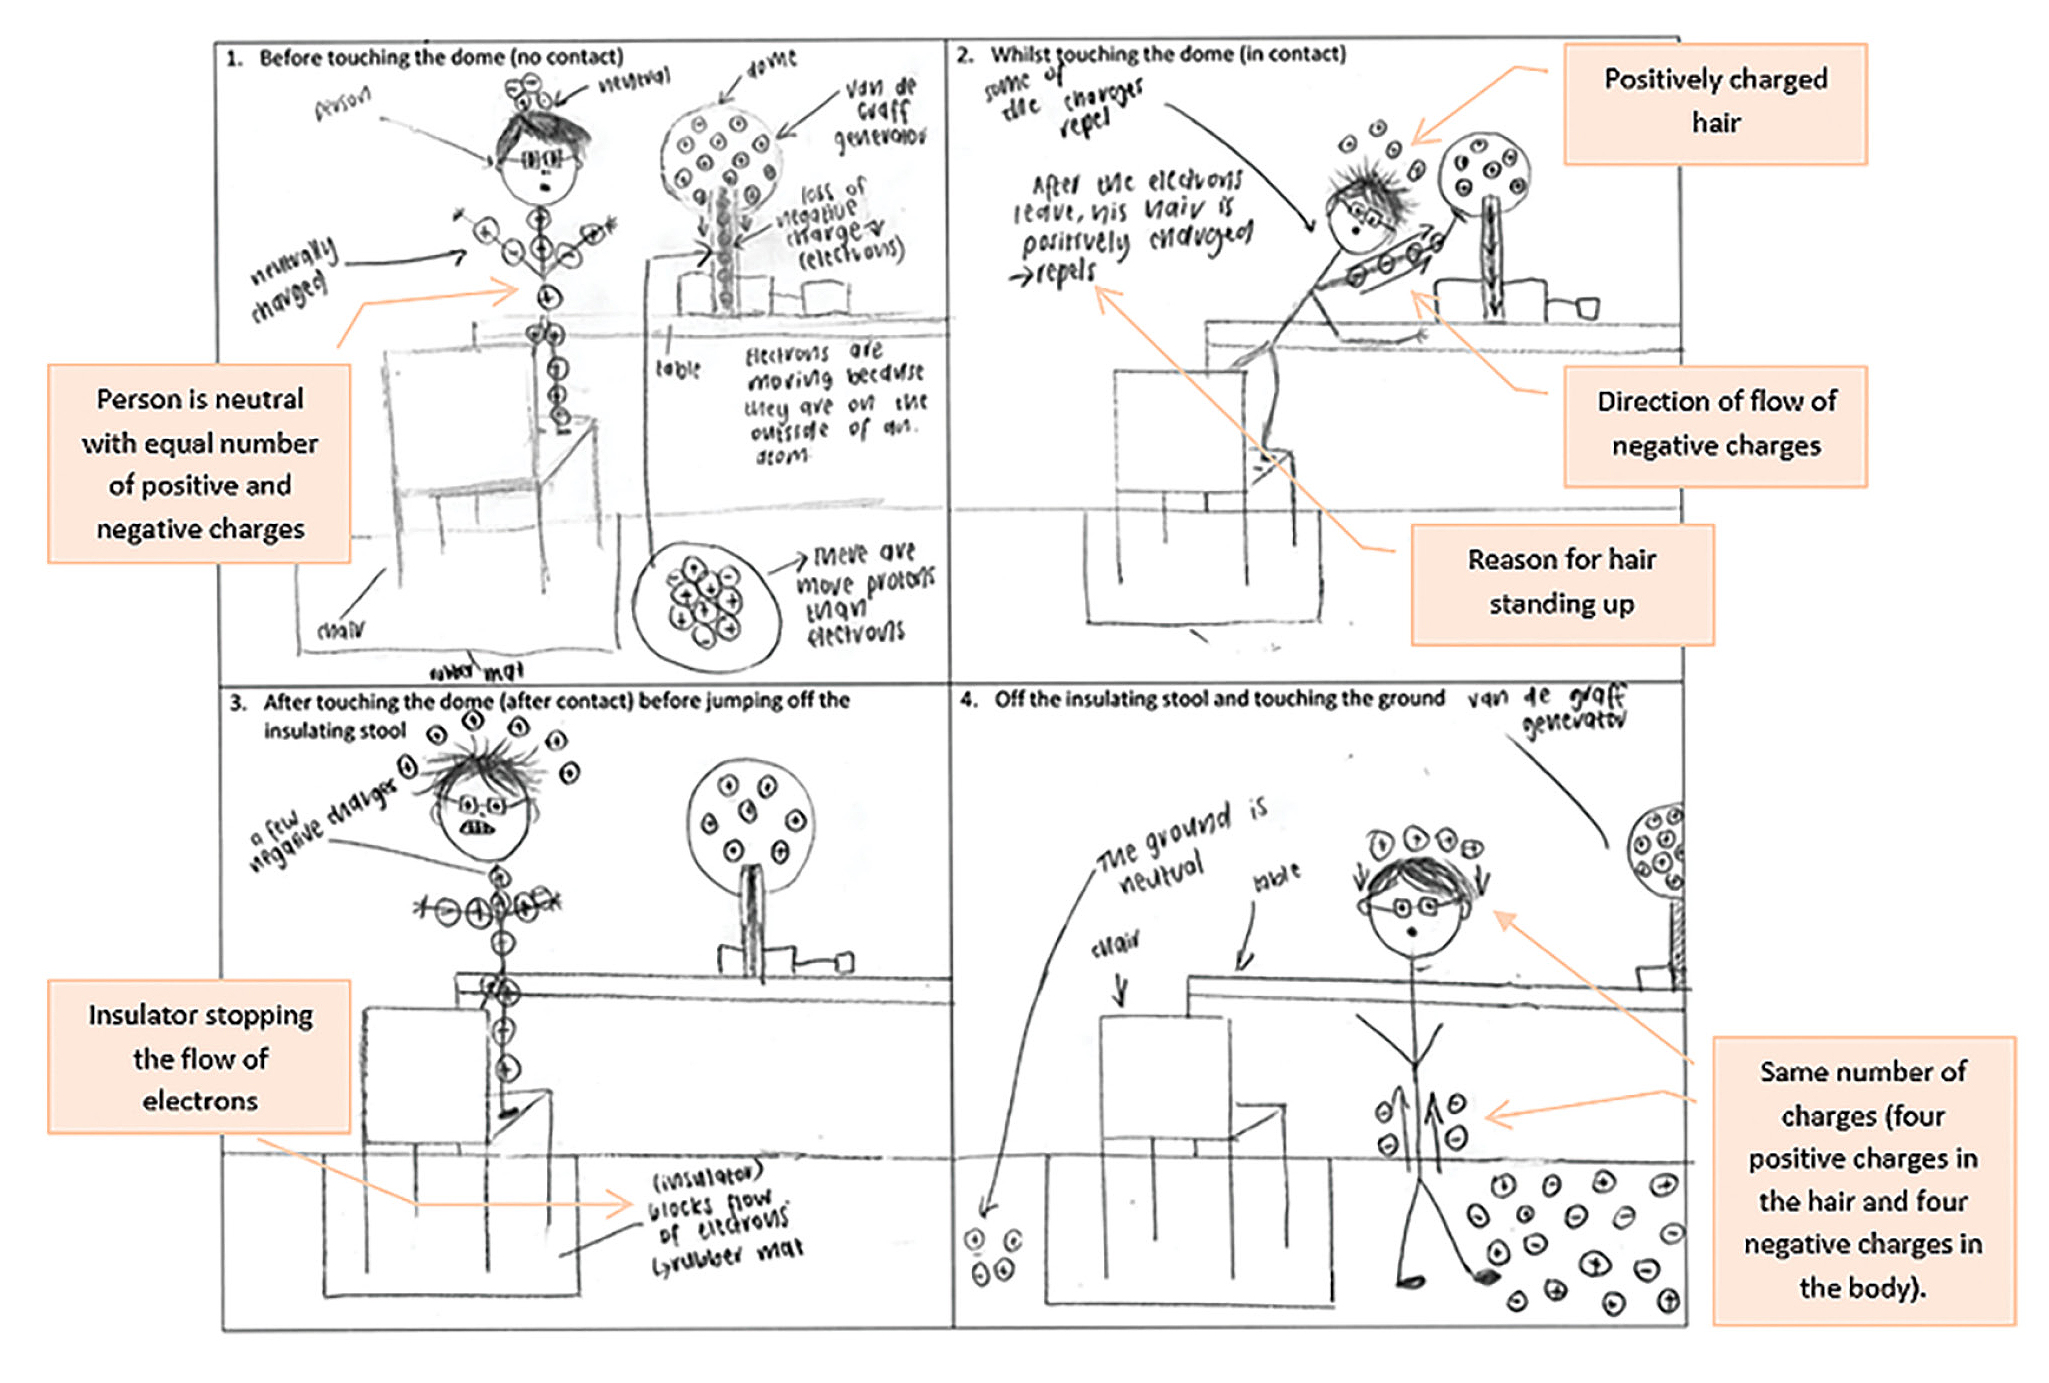 A student’s diagram that shows comprehensive understanding of the experiment (by Student #21).